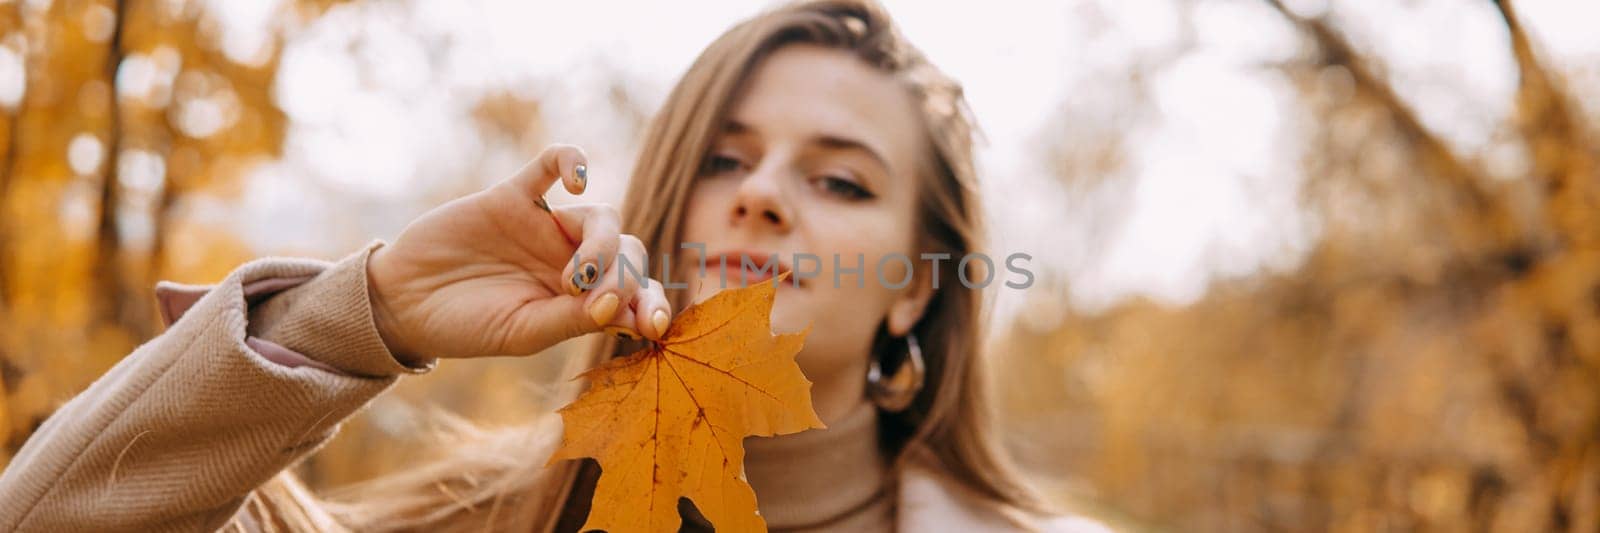 Portrait of a woman with an autumn maple leaf. Railway, autumn leaves, a young long-haired woman in a light coat coat, close-up. by Annu1tochka